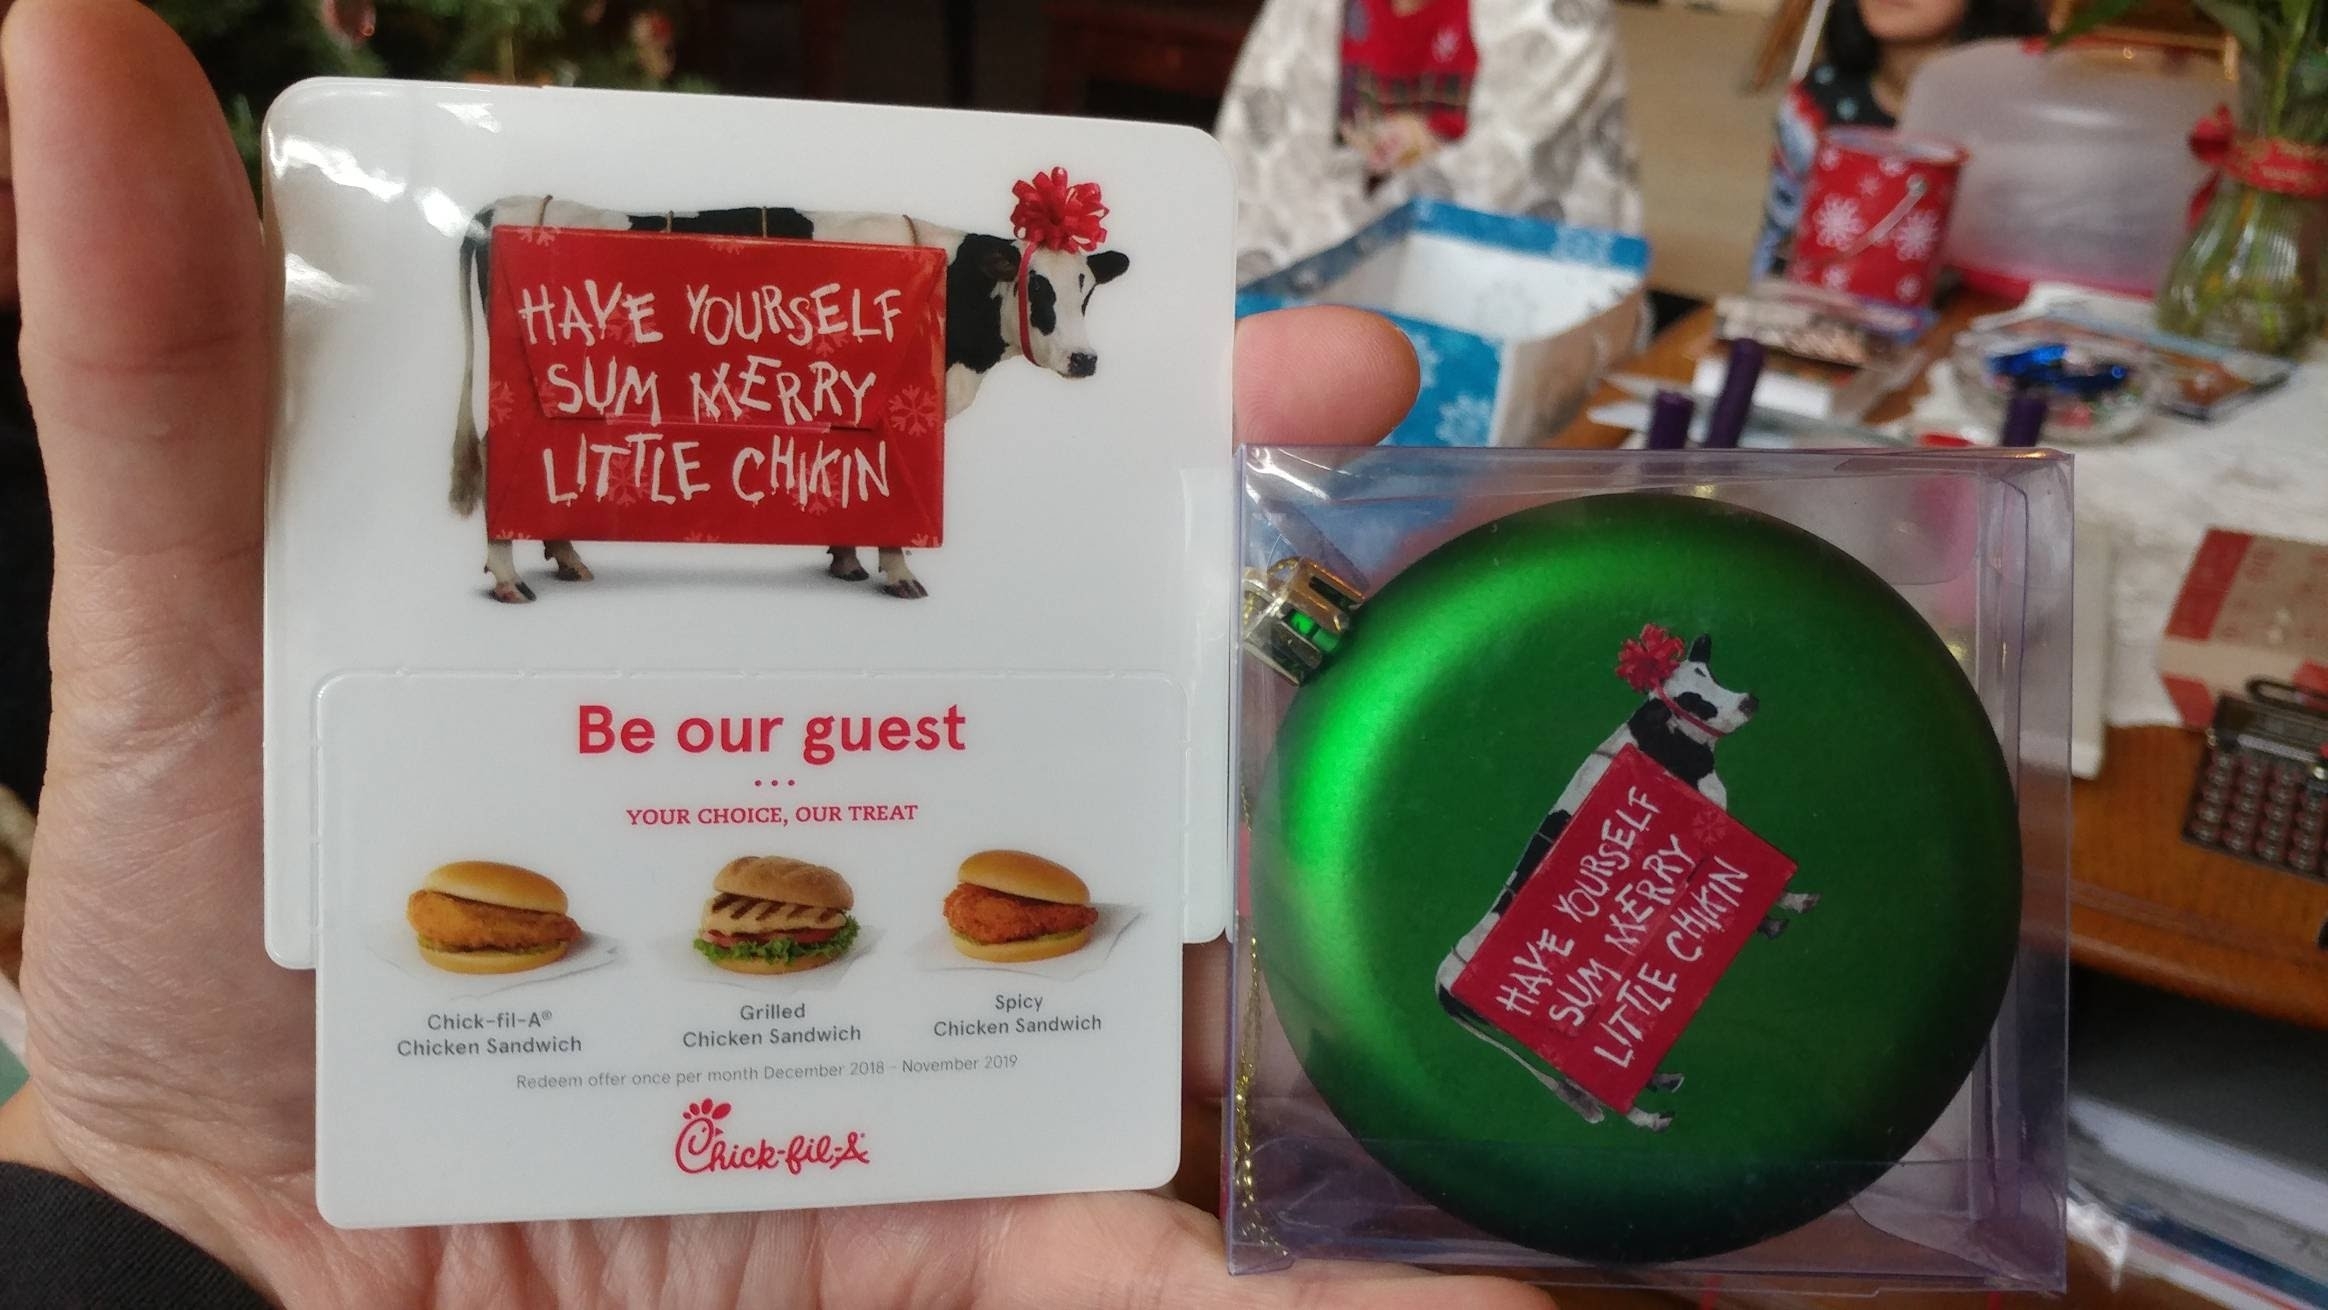 I Received This Chick-Fil-A Ornament And Gift Card For intended for Will Chick Fila Sell A Calendar For 2020